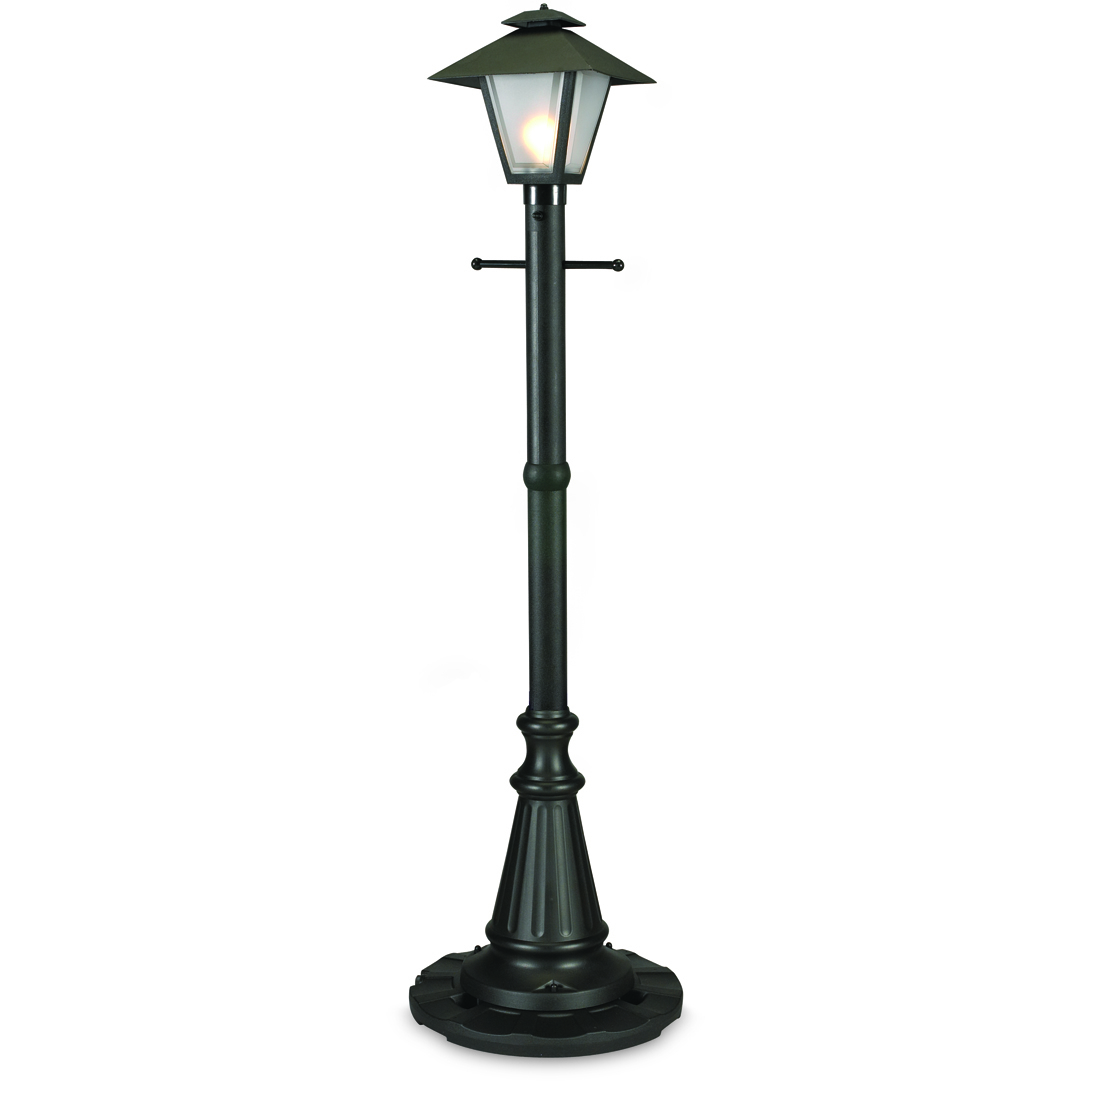 Patio living concepts cape cod outdoor electric light post lamp